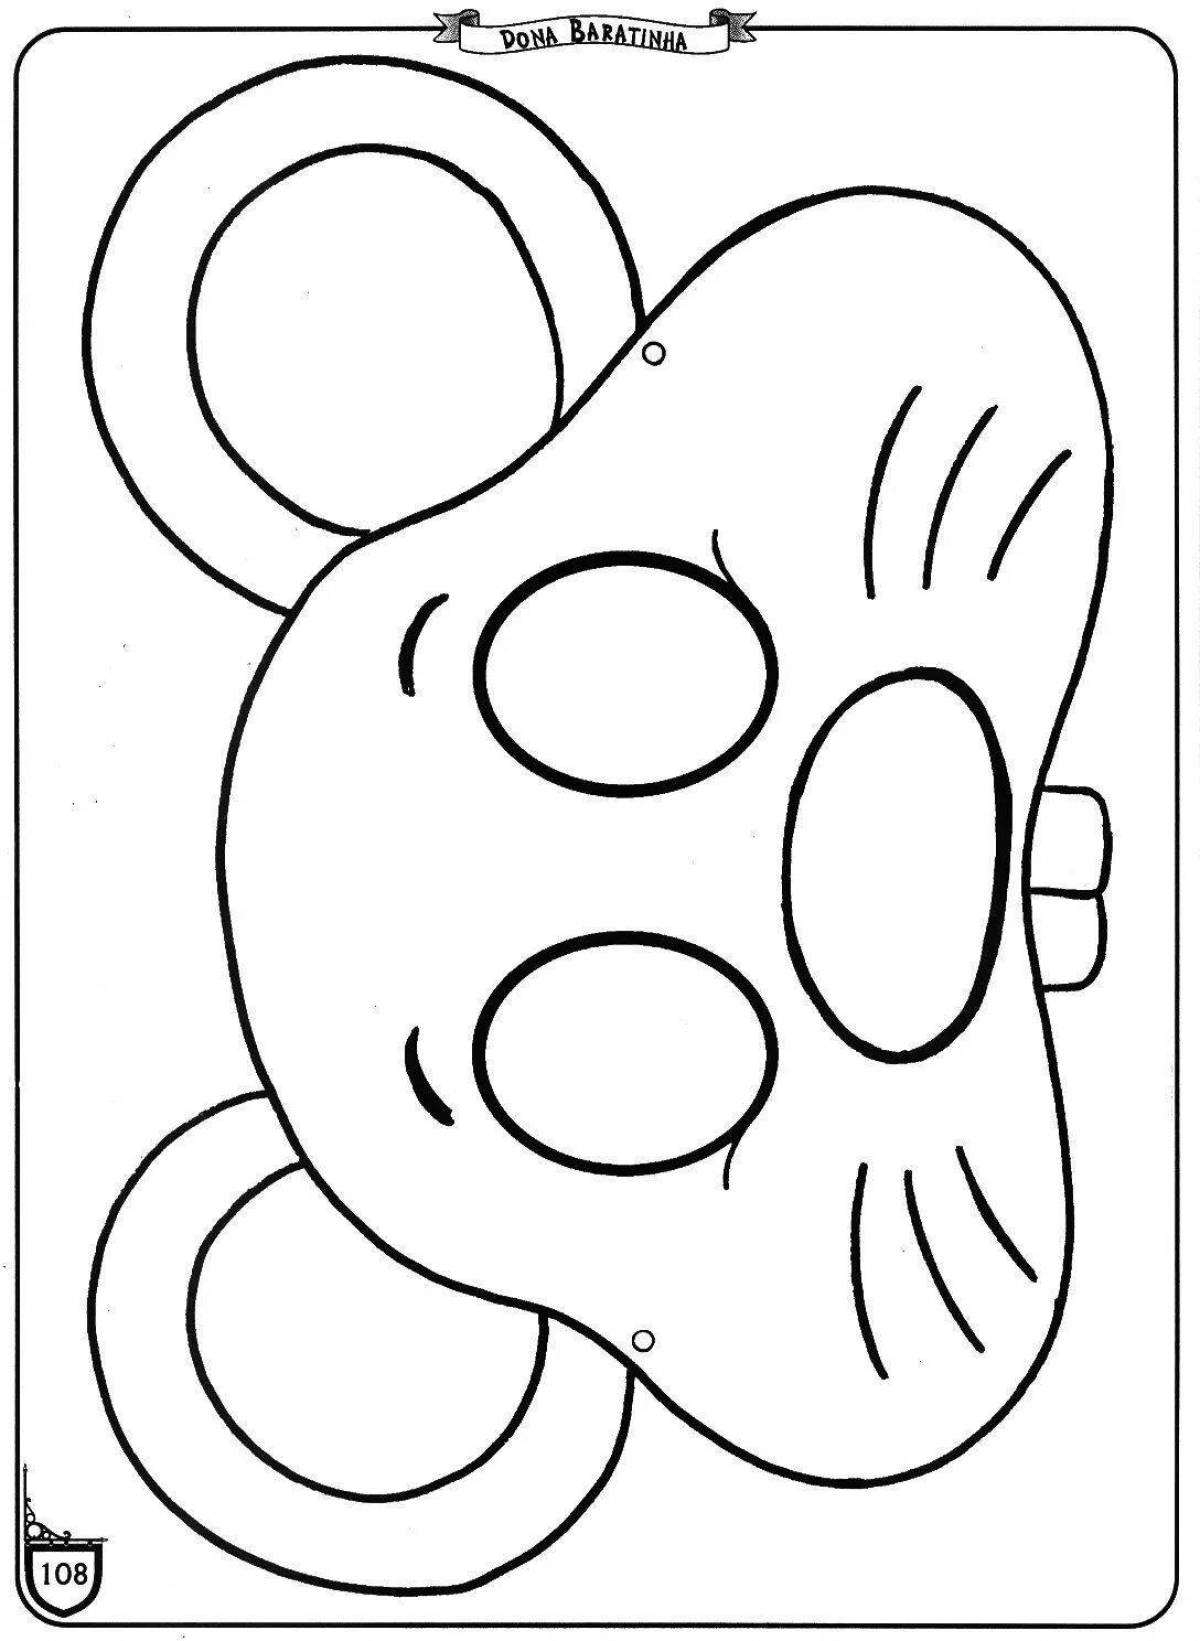 Glasses mouse #2